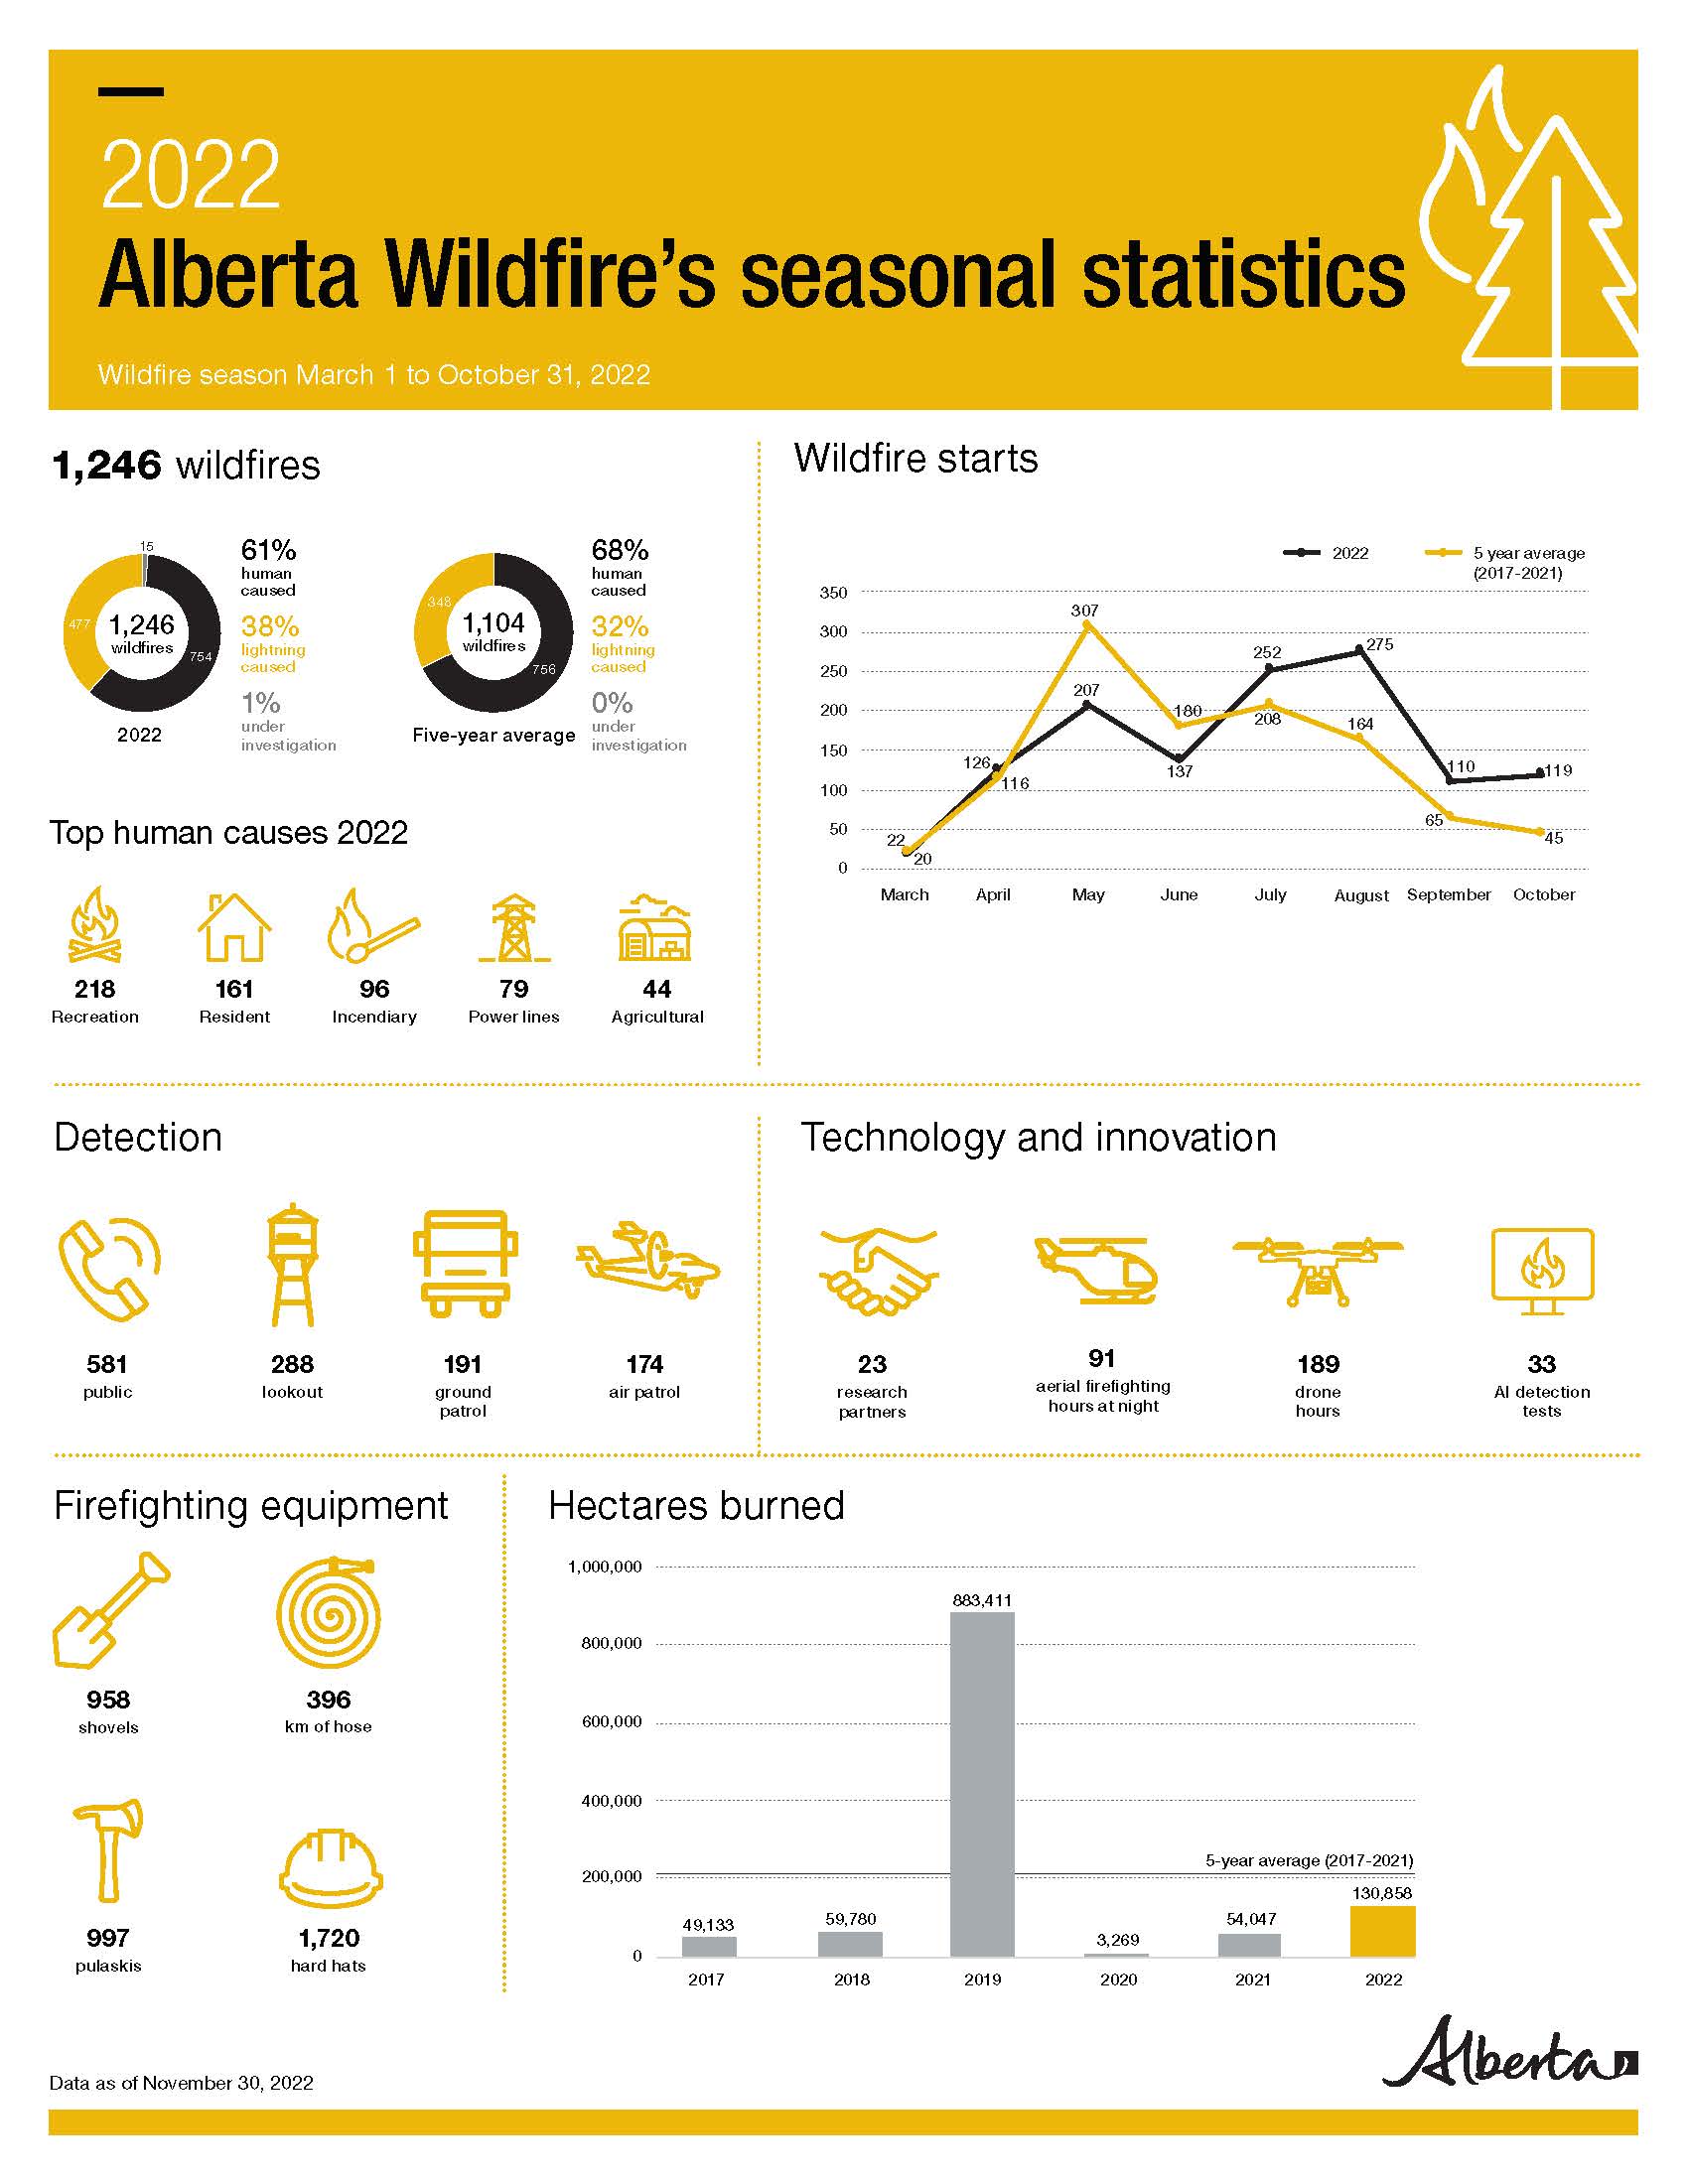 AlbertaWildfire-2022-infographic FINAL-2